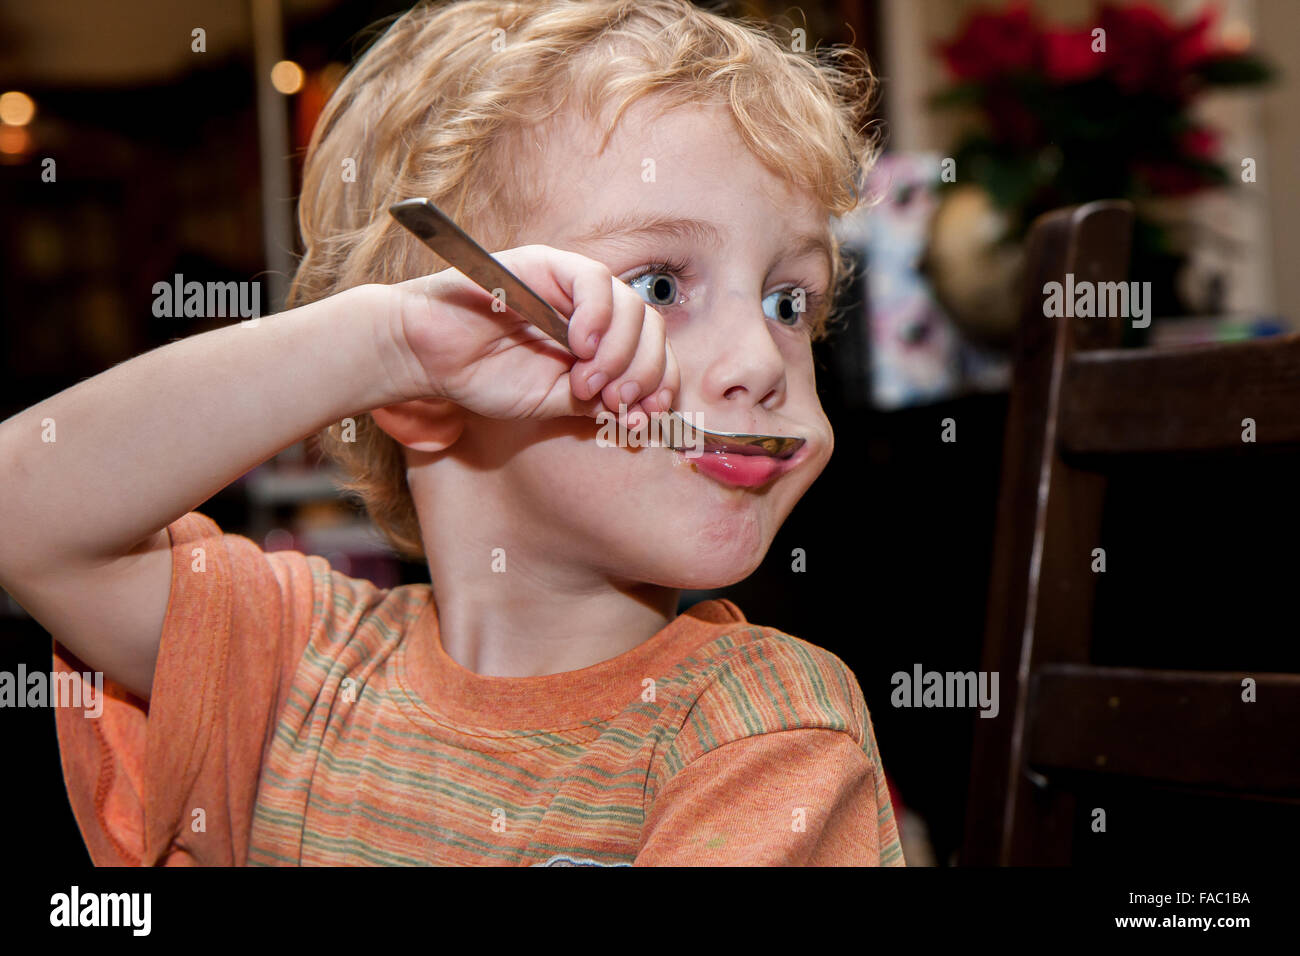 A young, blond hair boy makes faces when eating soup Stock Photo